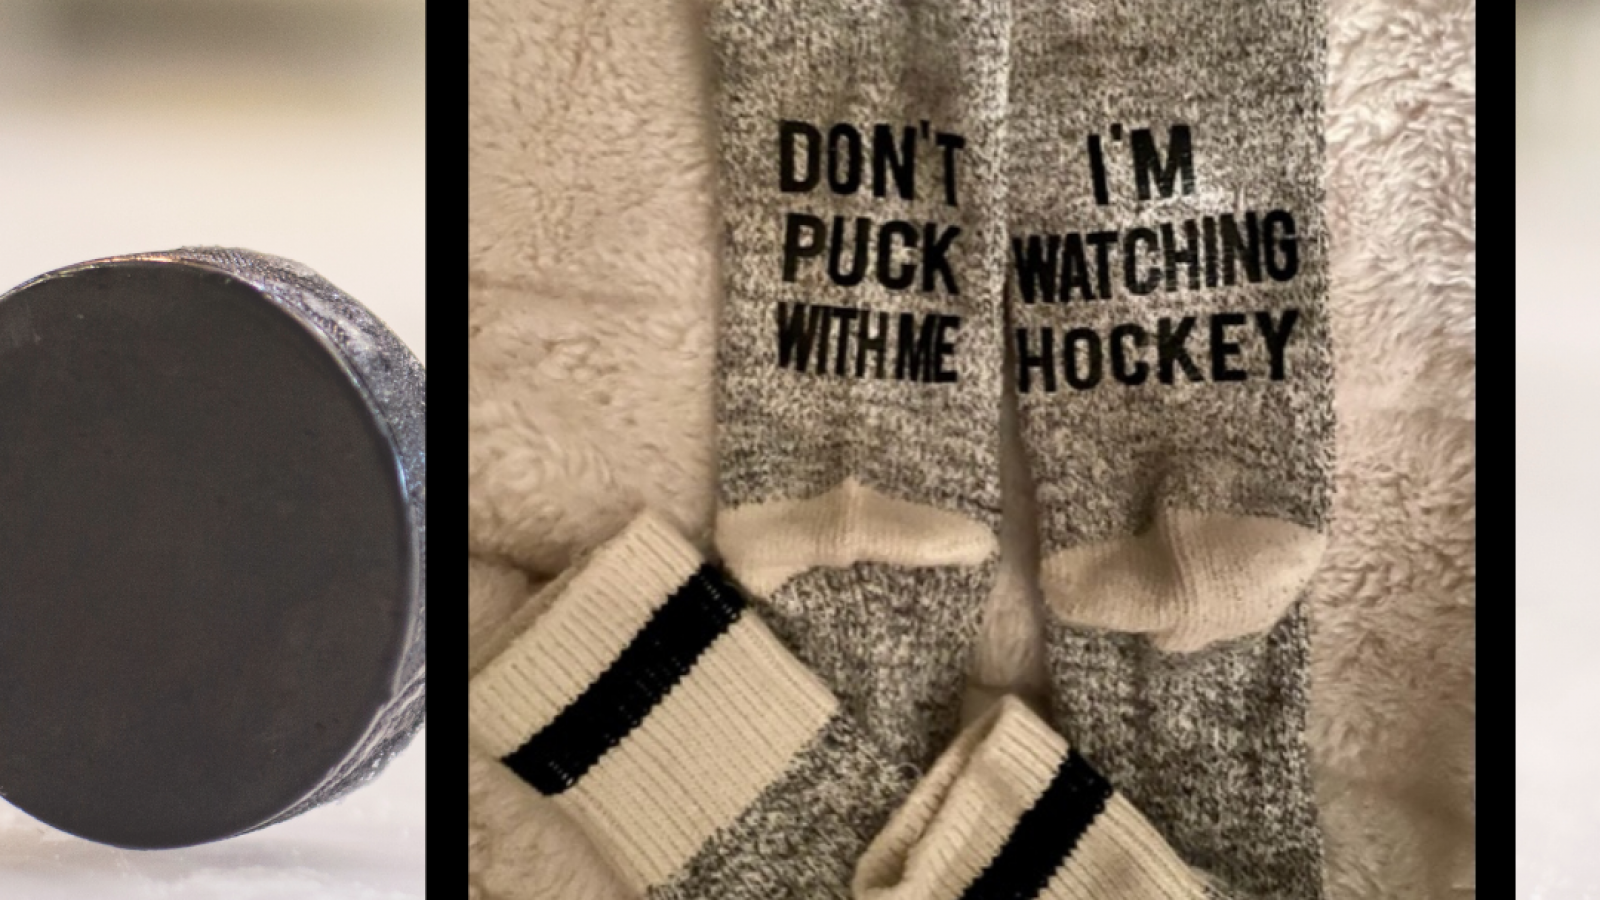 Don't puck with me socks